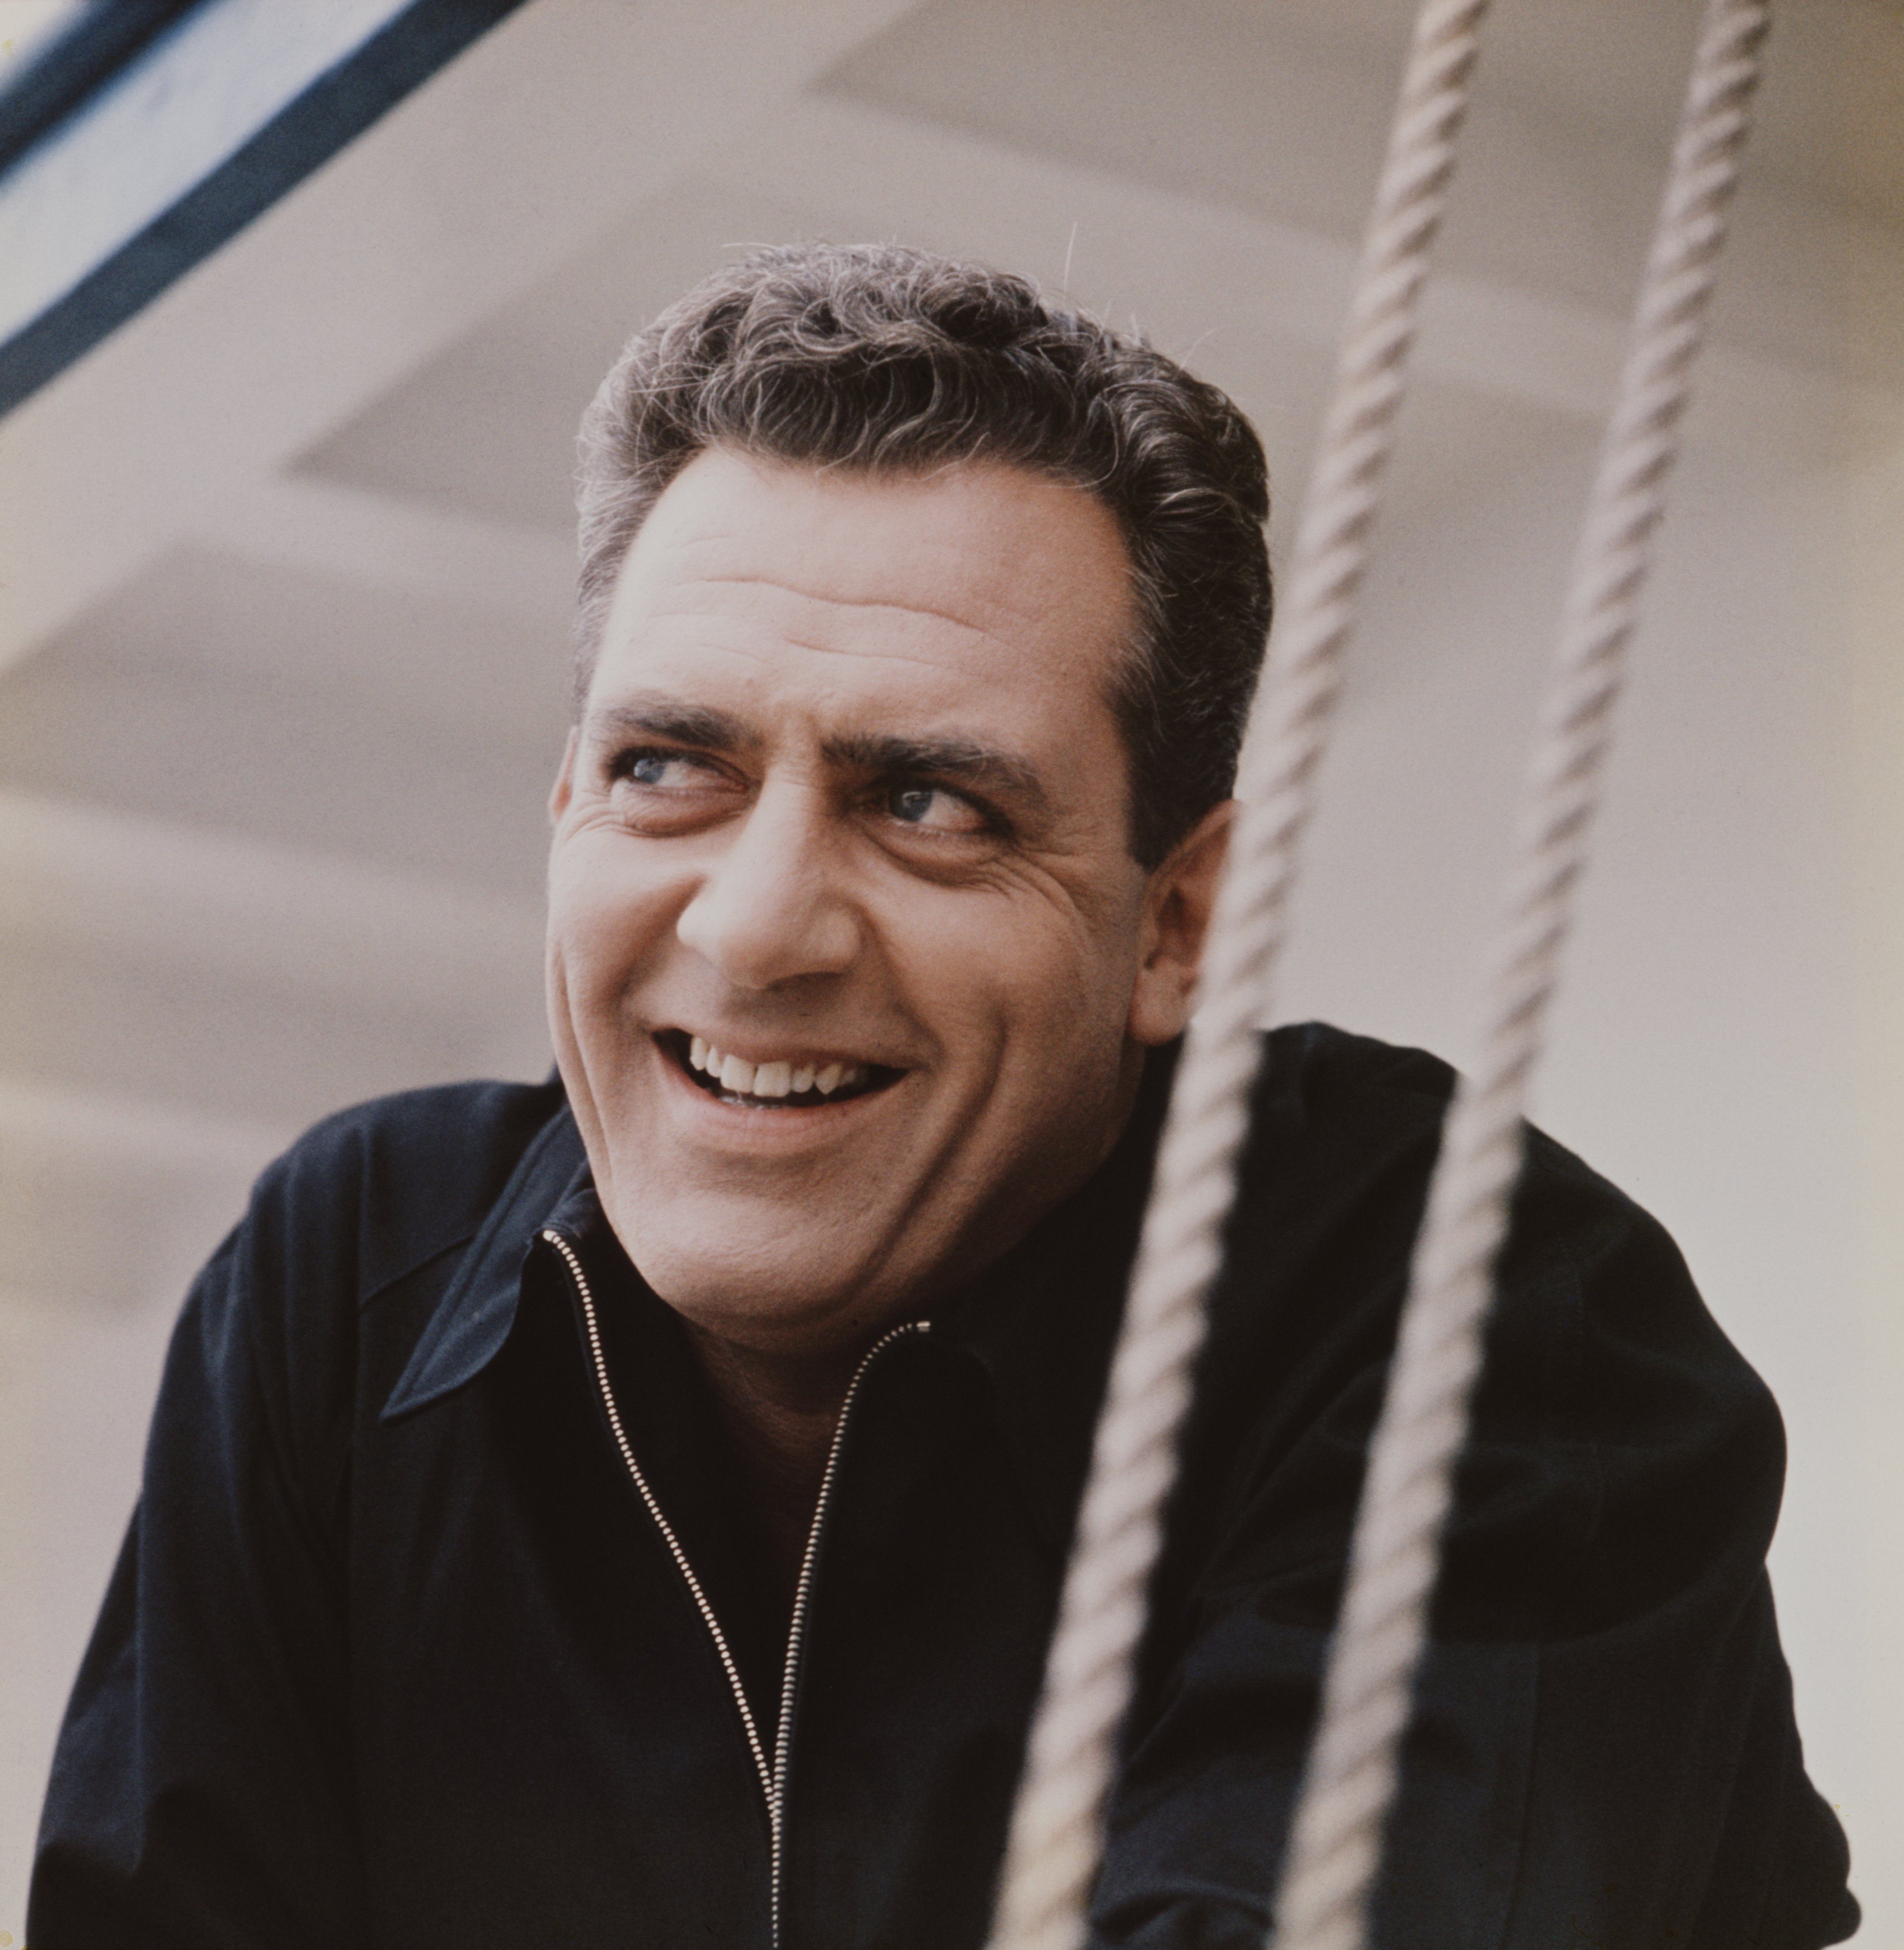 "Ironside" star Raymond Burr pictured smiling wearing a black jacket in 1962. | Source: Getty Images